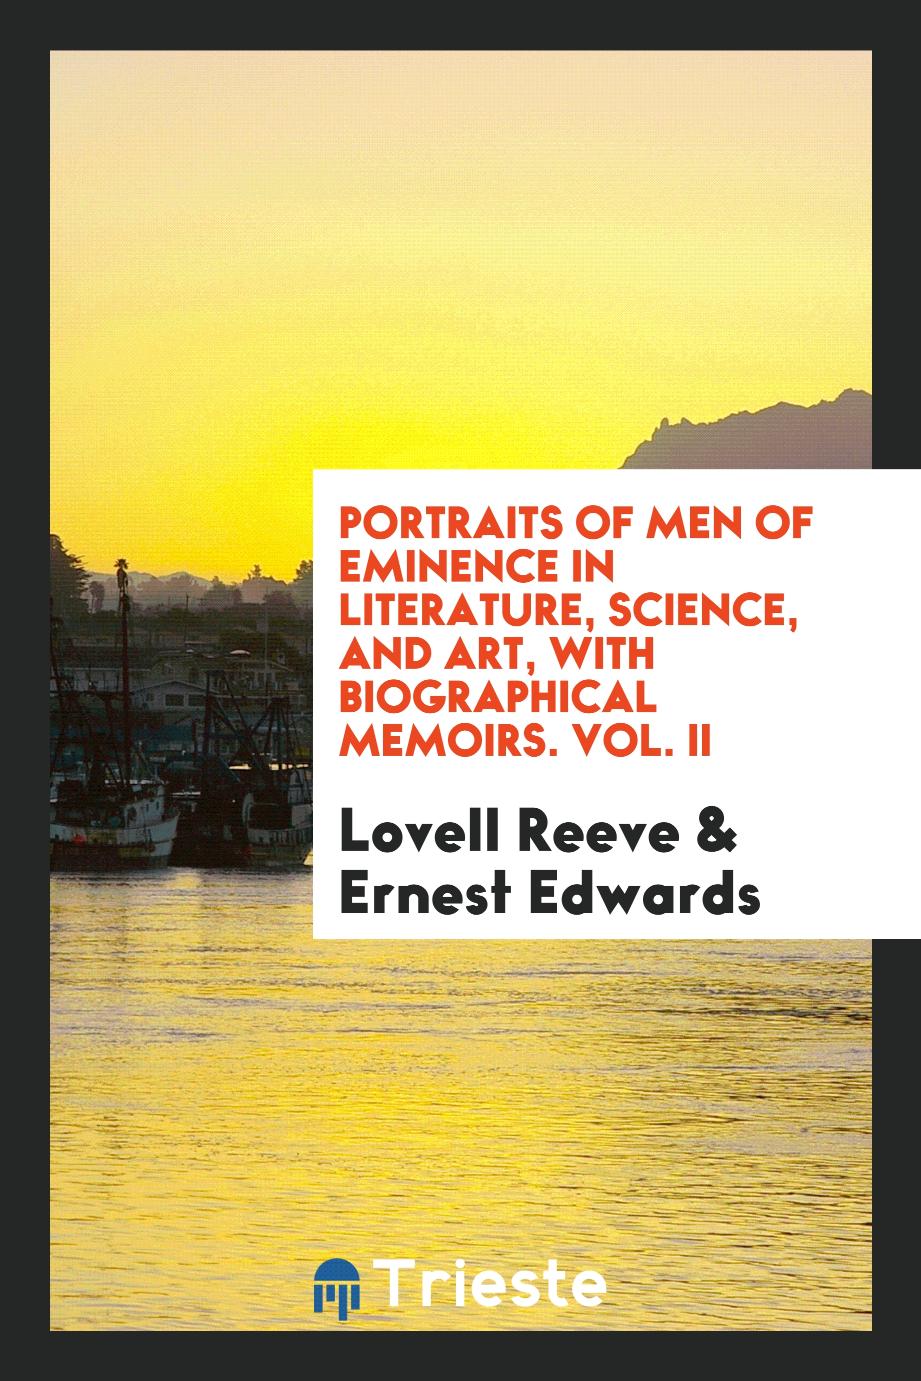 Portraits of Men of Eminence in Literature, Science, and Art, with Biographical Memoirs. Vol. II